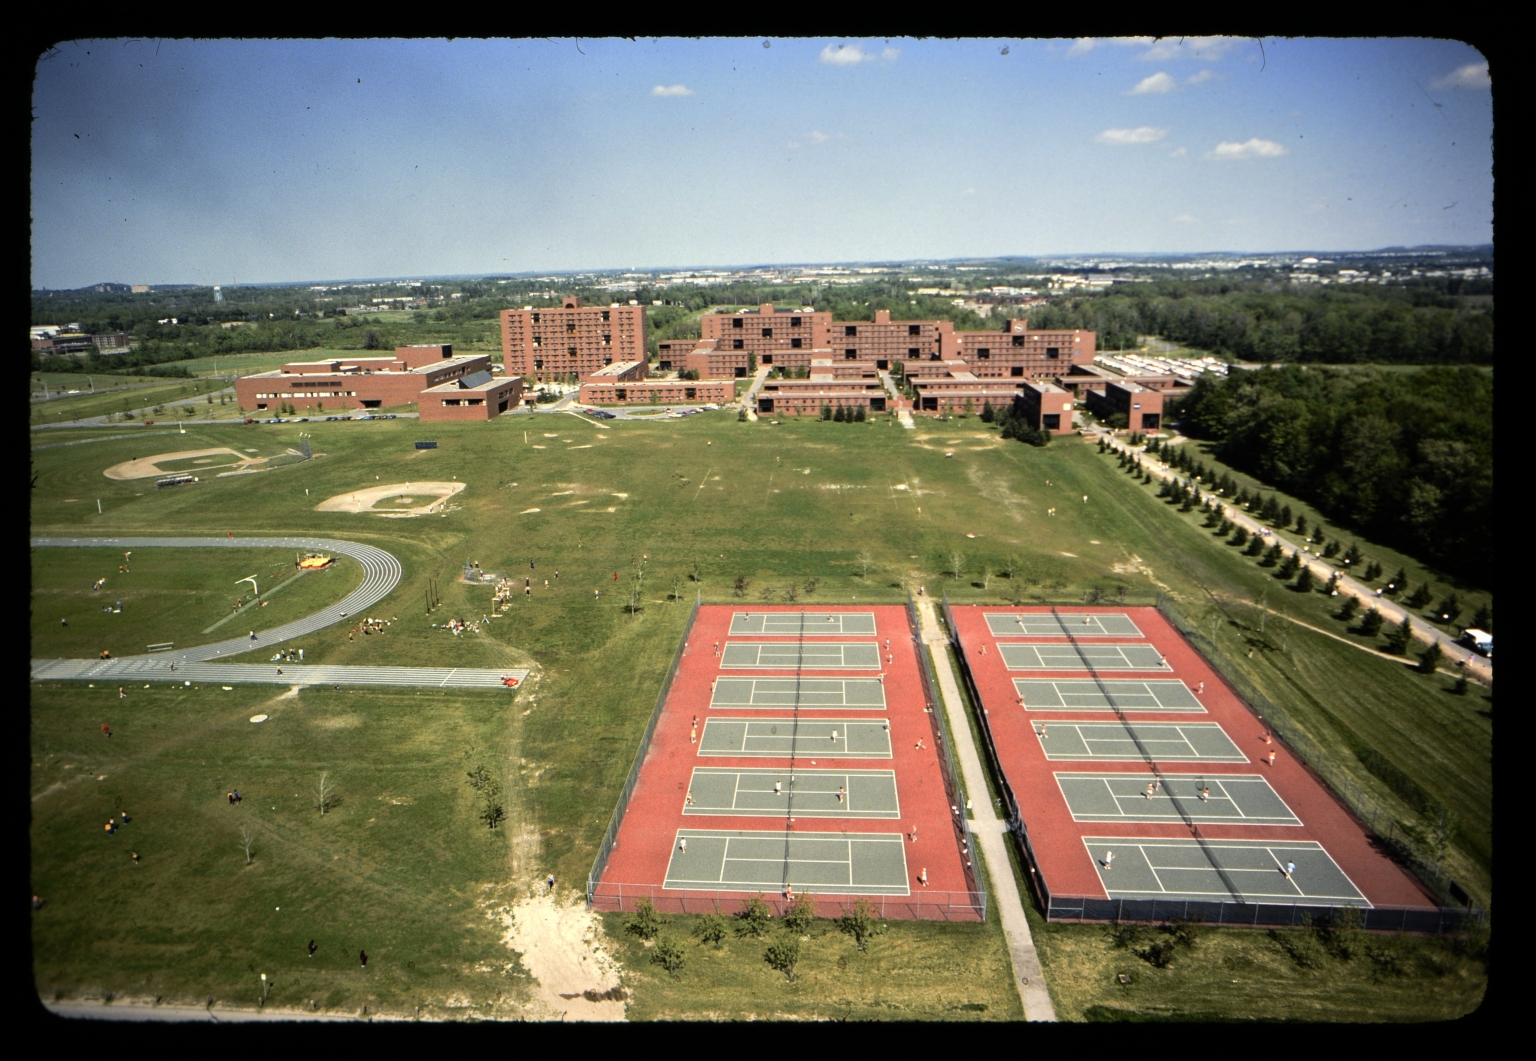 Aerial view of tennis courts and dorms